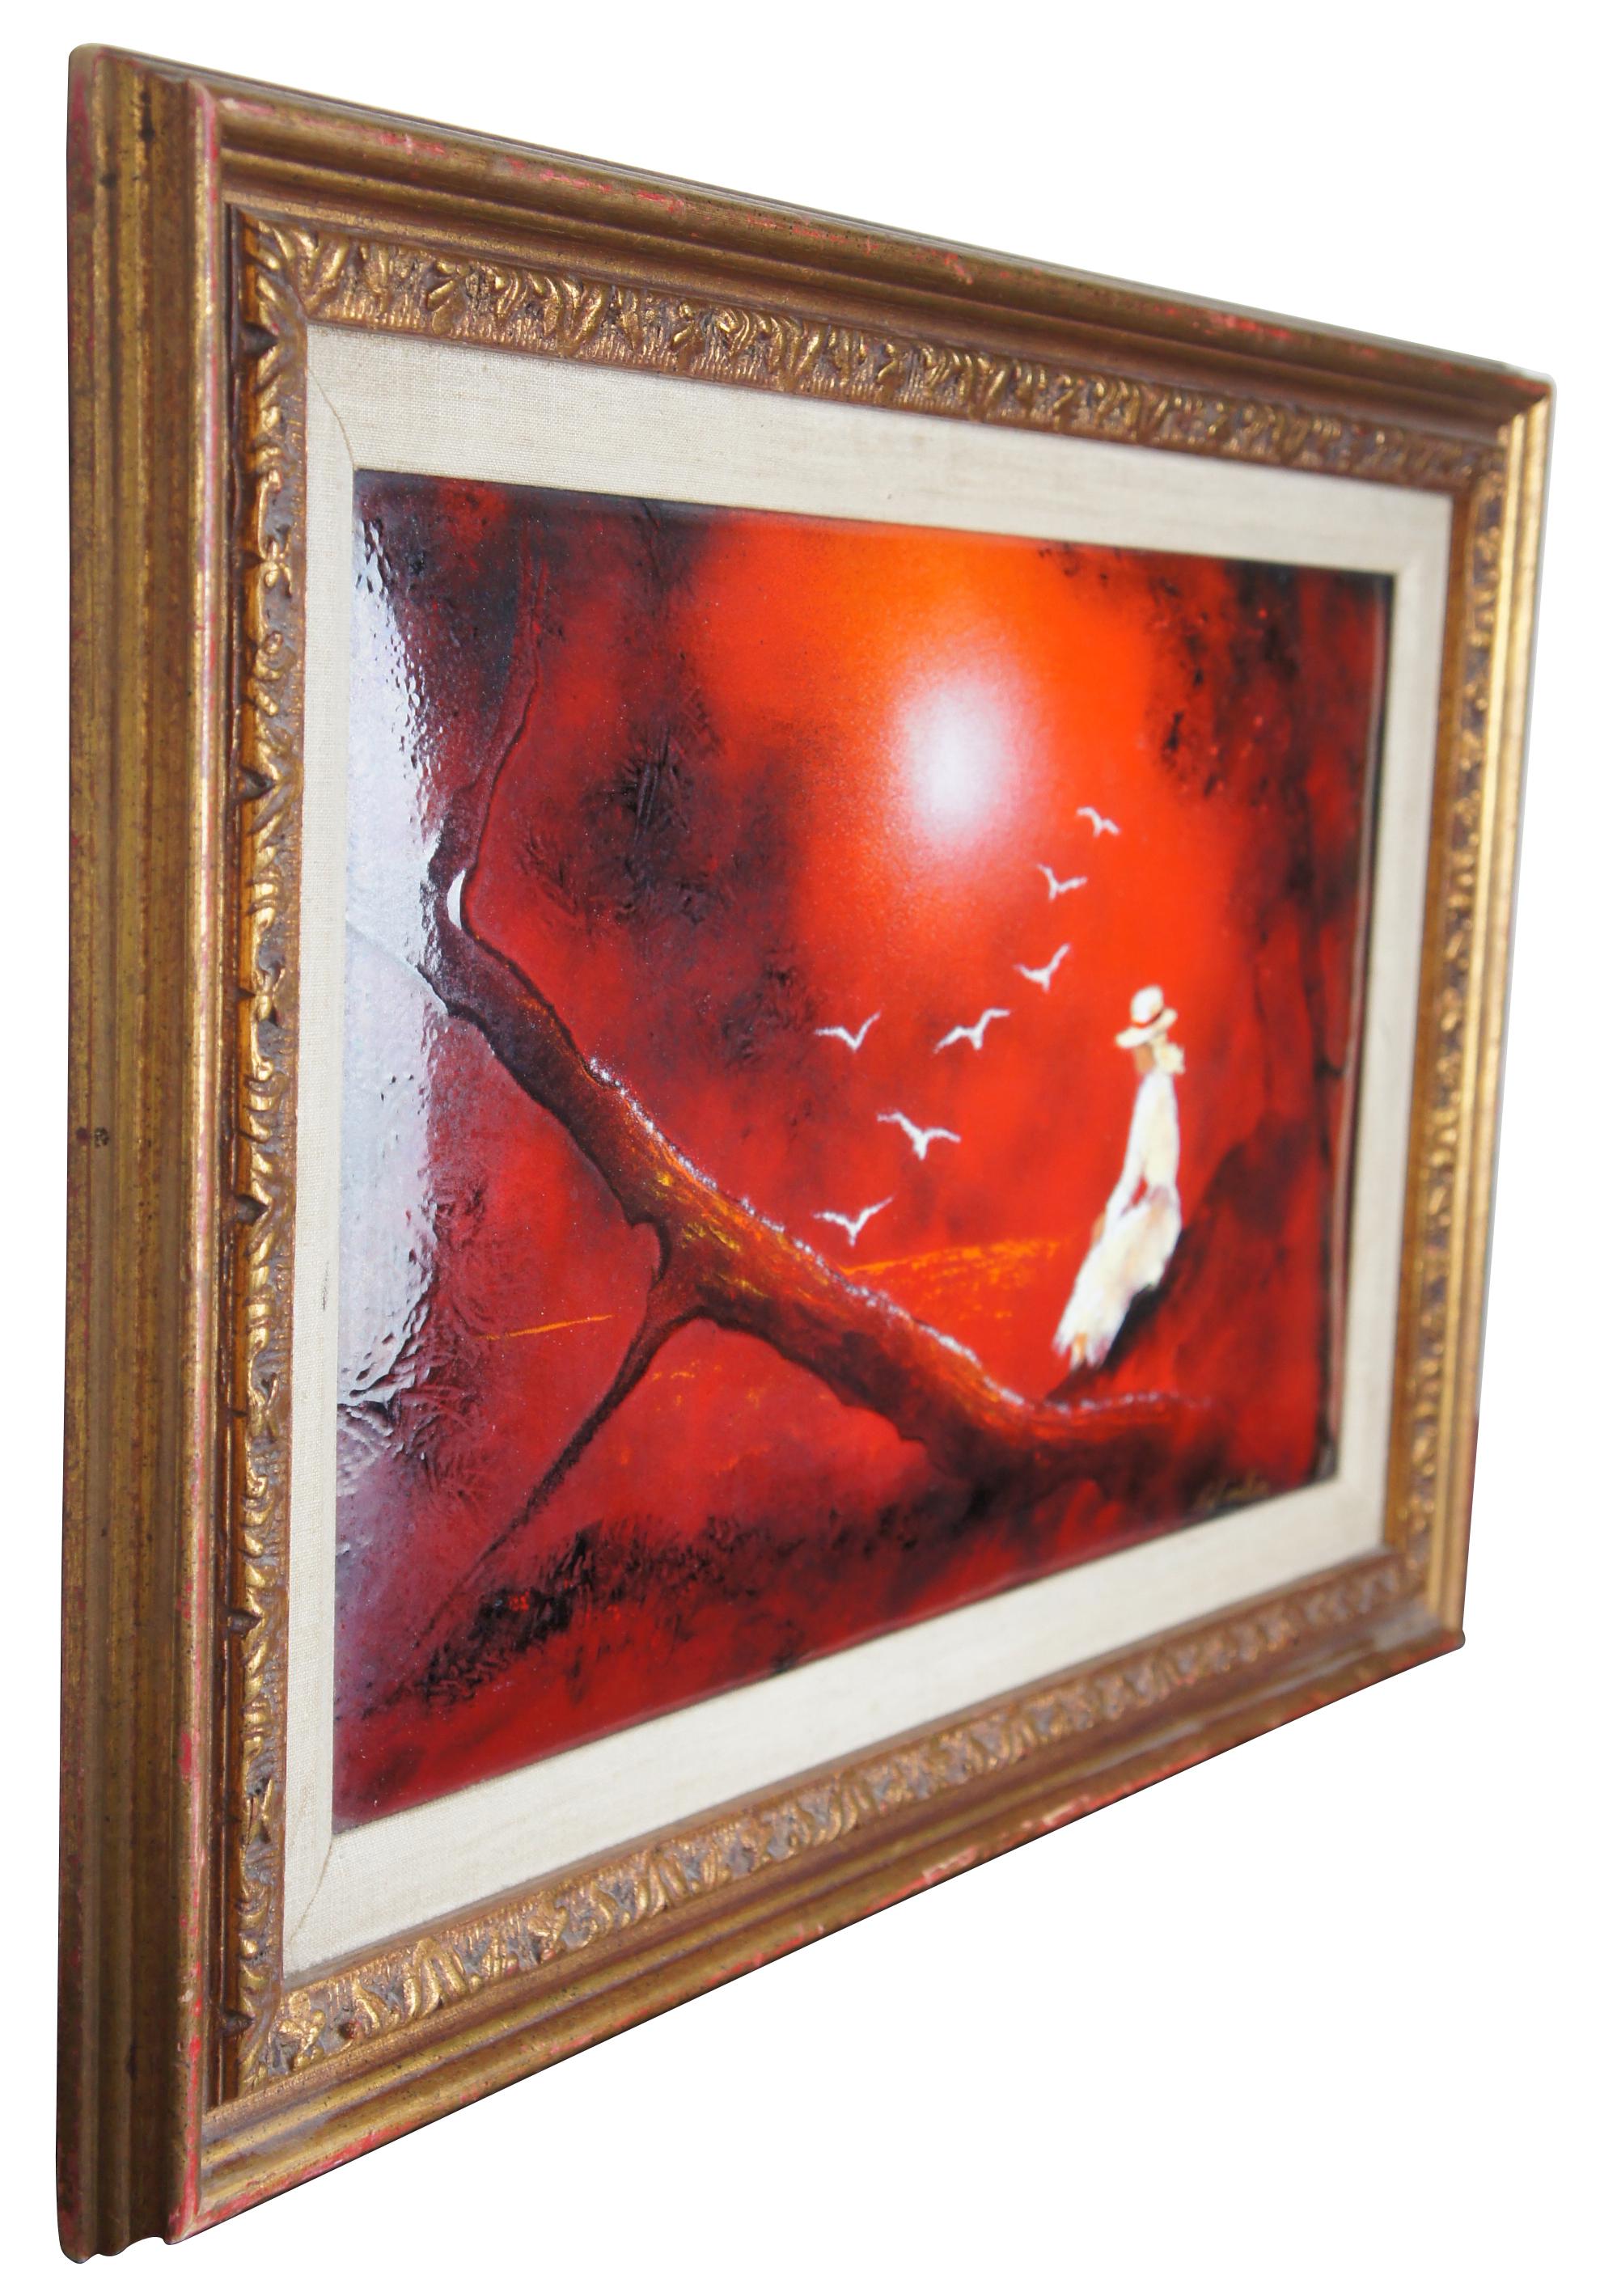 Signed Carol Simkin (American, 20th Century) enamel on copper impressionist style painting in shades of red showing a white clad figure seated at the edge of a body of water watching a flock of birds. Carol was a student of Max Karp who was known as